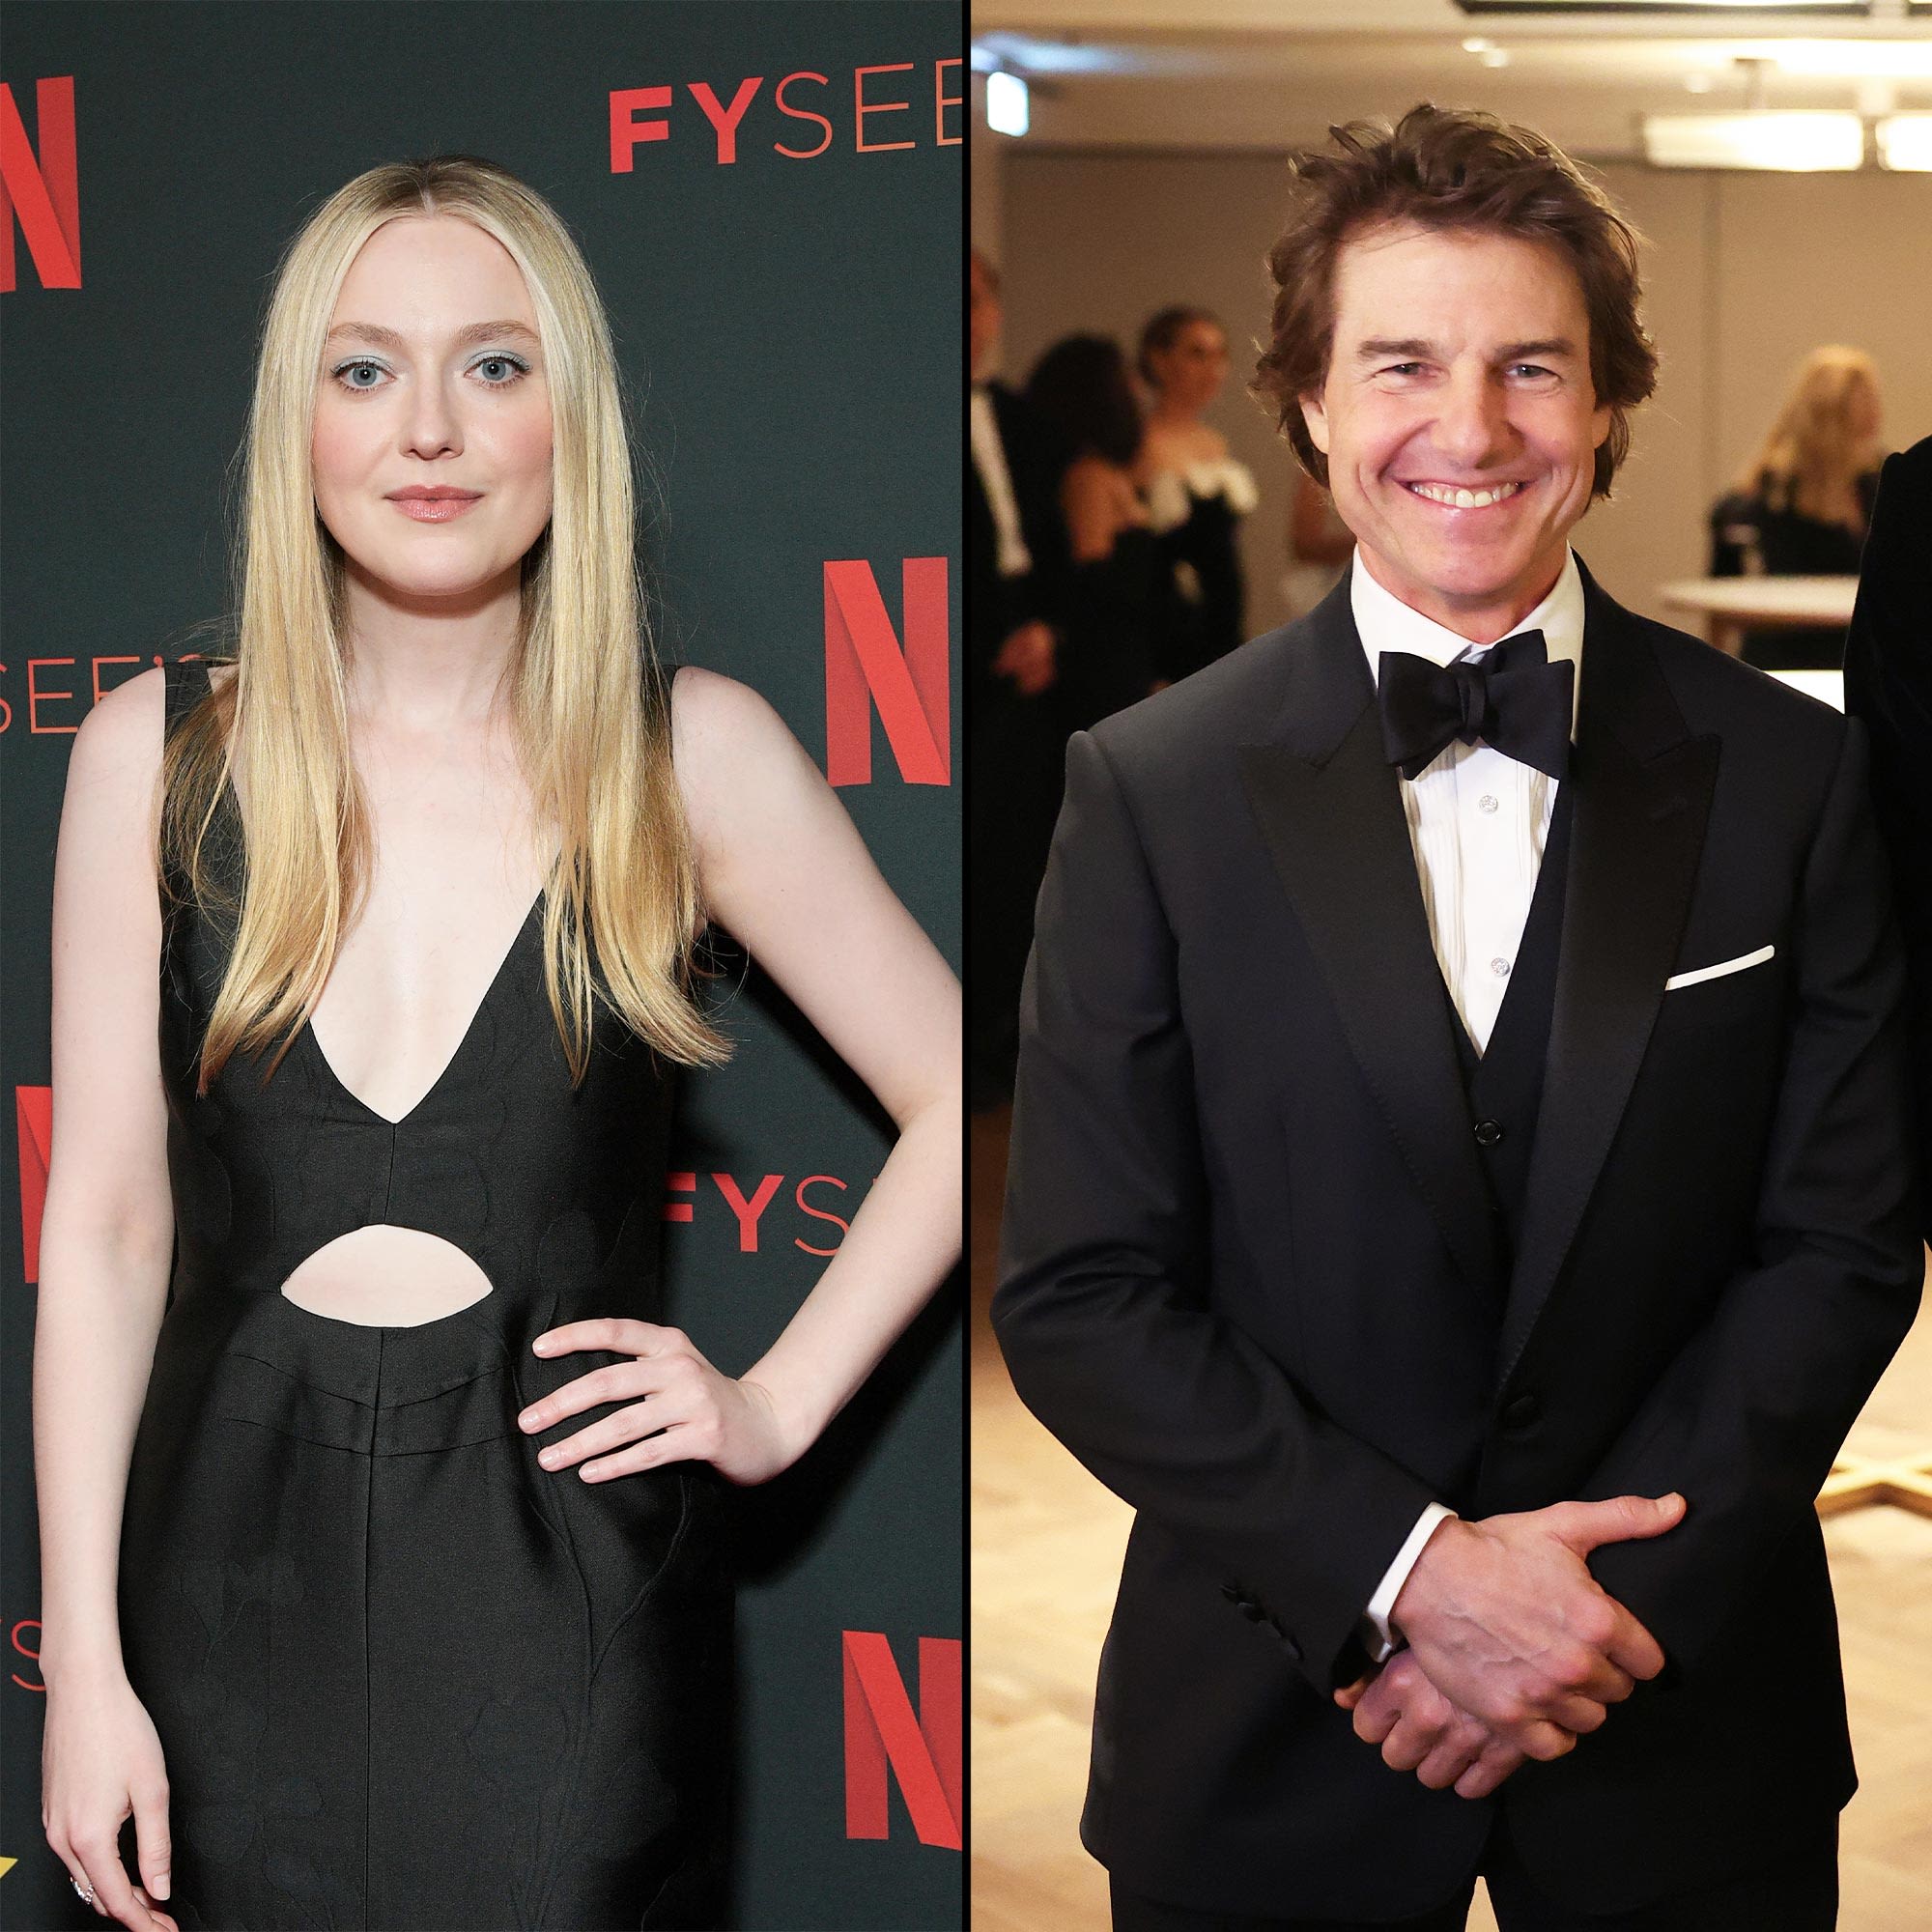 The Sweet Reason Tom Cruise Gifts Dakota Fanning a Pair of Shoes for Her Birthday Every Year